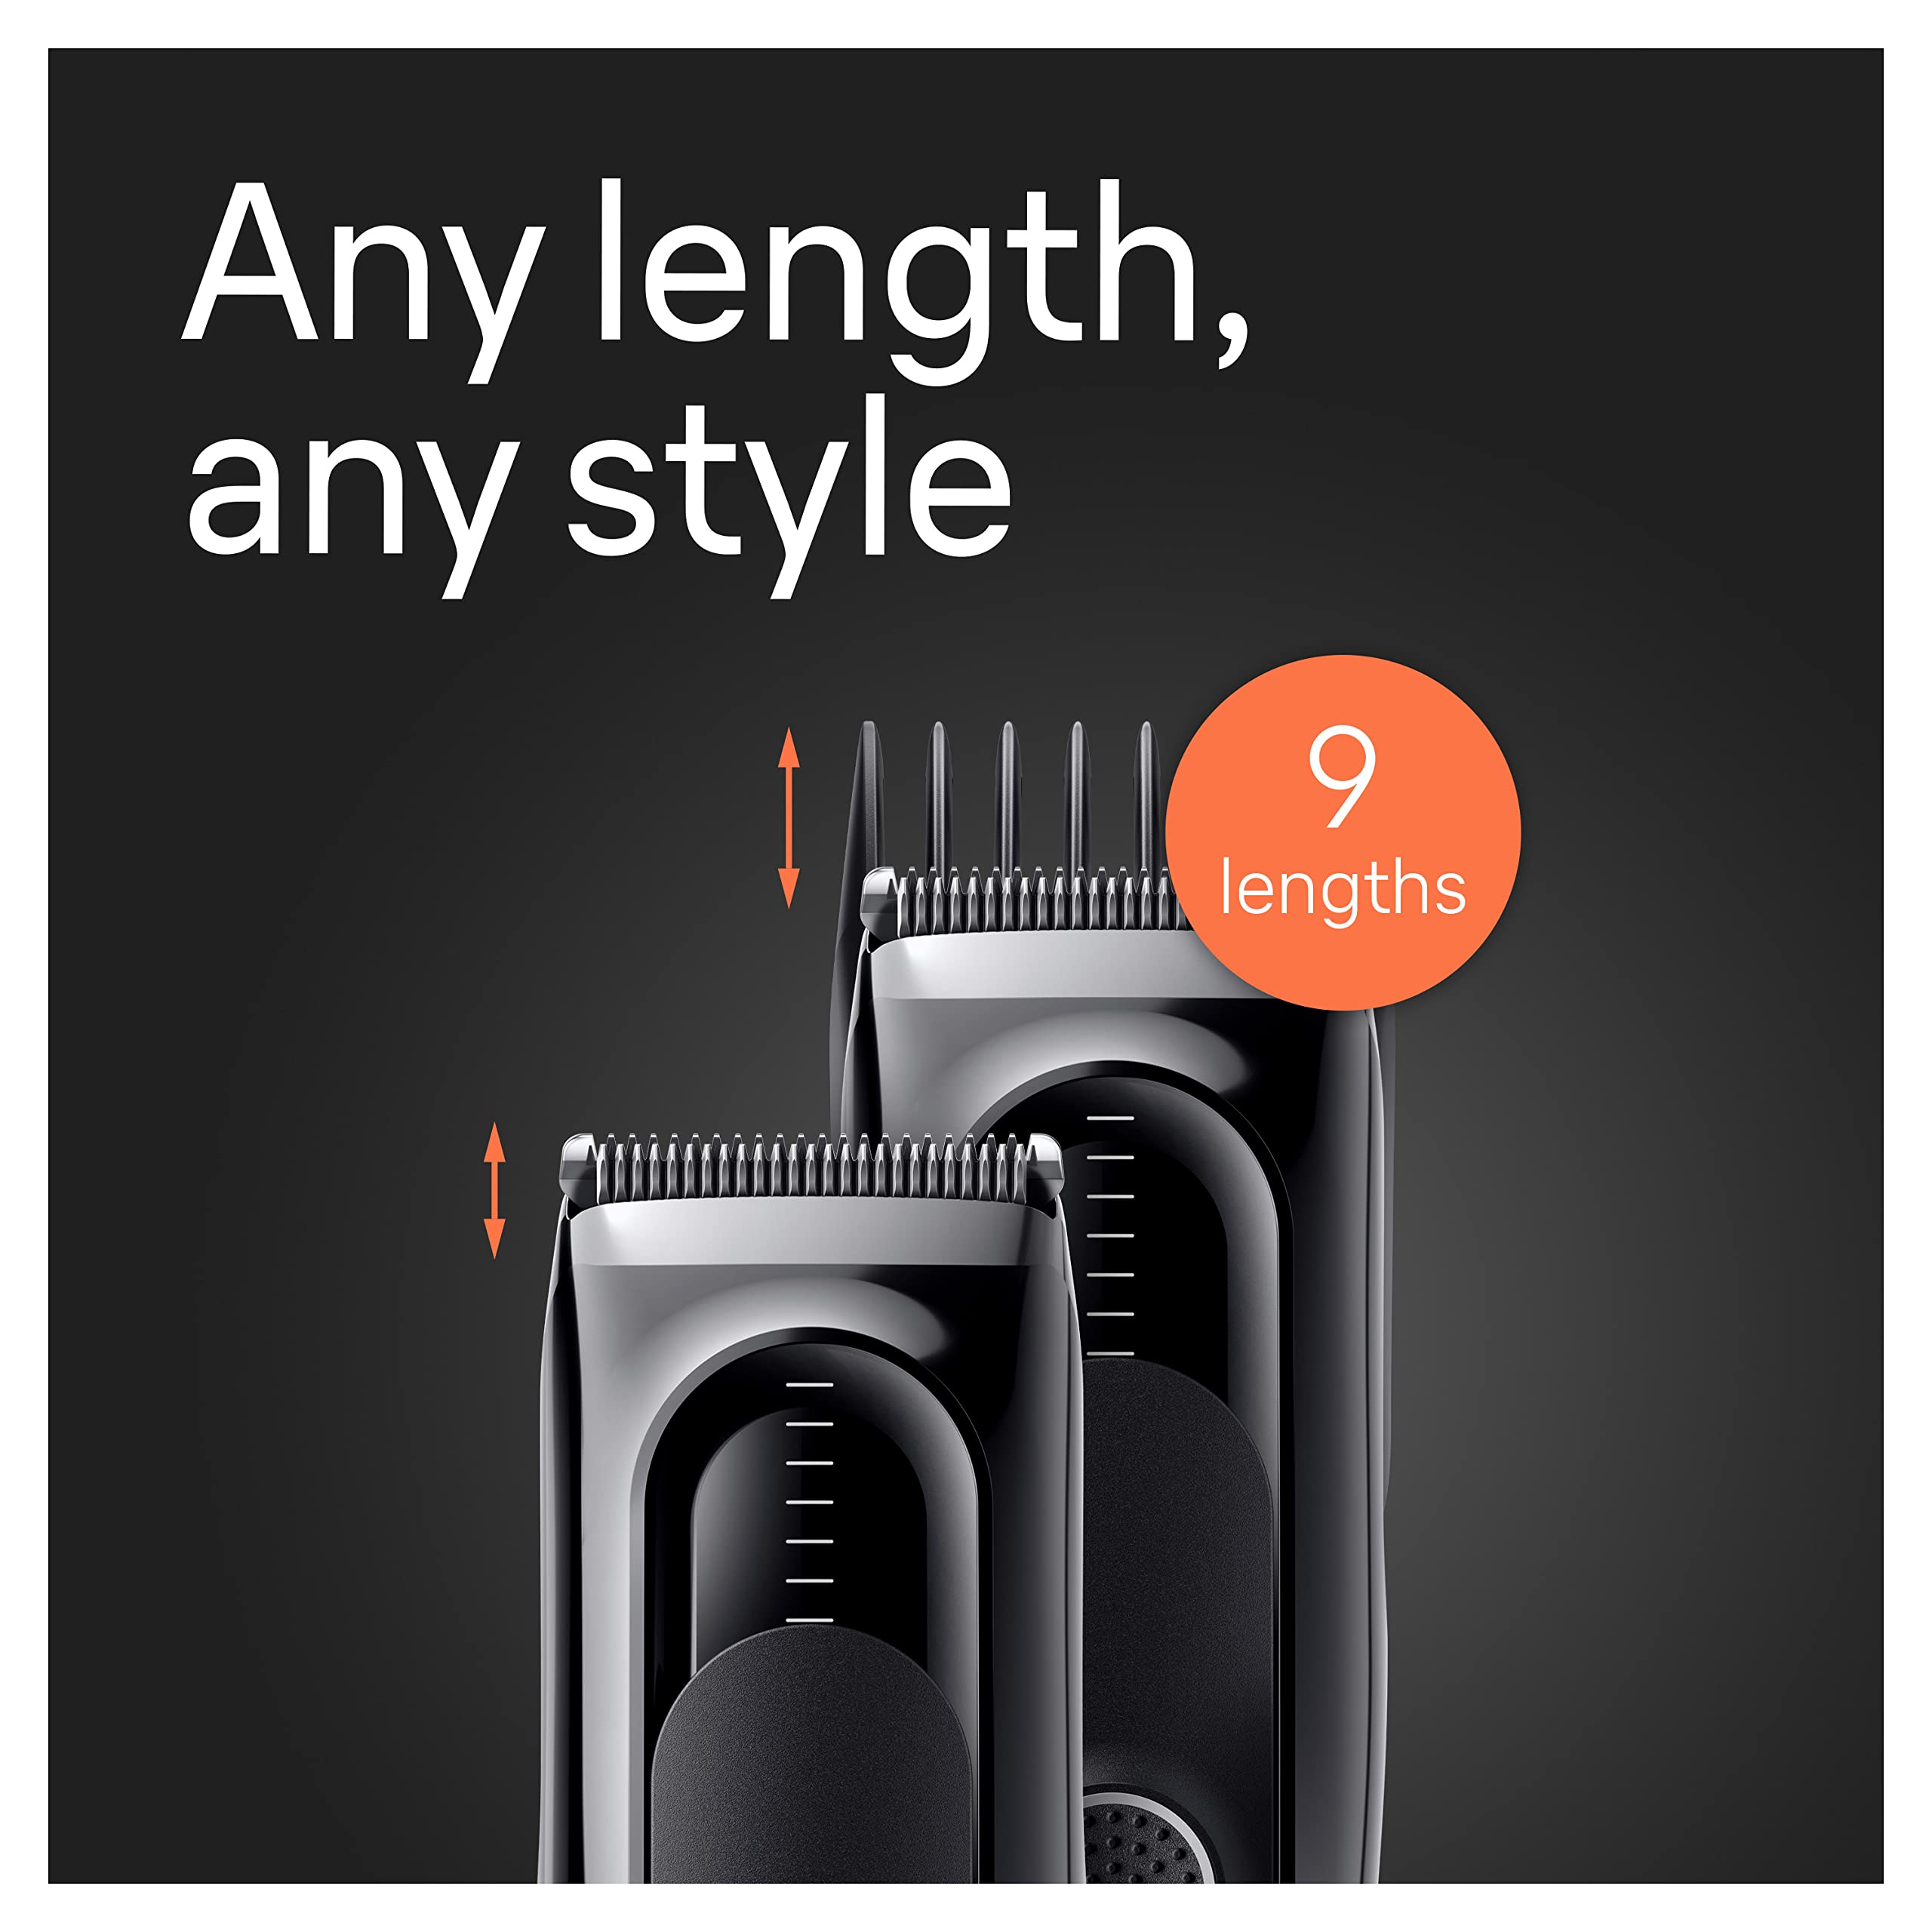 Braun Hair Clippers Series 5 5310, Hair Clippers for Men, Hair Clip from Home with 9 Length Settings, Incl. Memory SafetyLock Recall Setting, Ultra-Sharp Blades, 2 Combs,